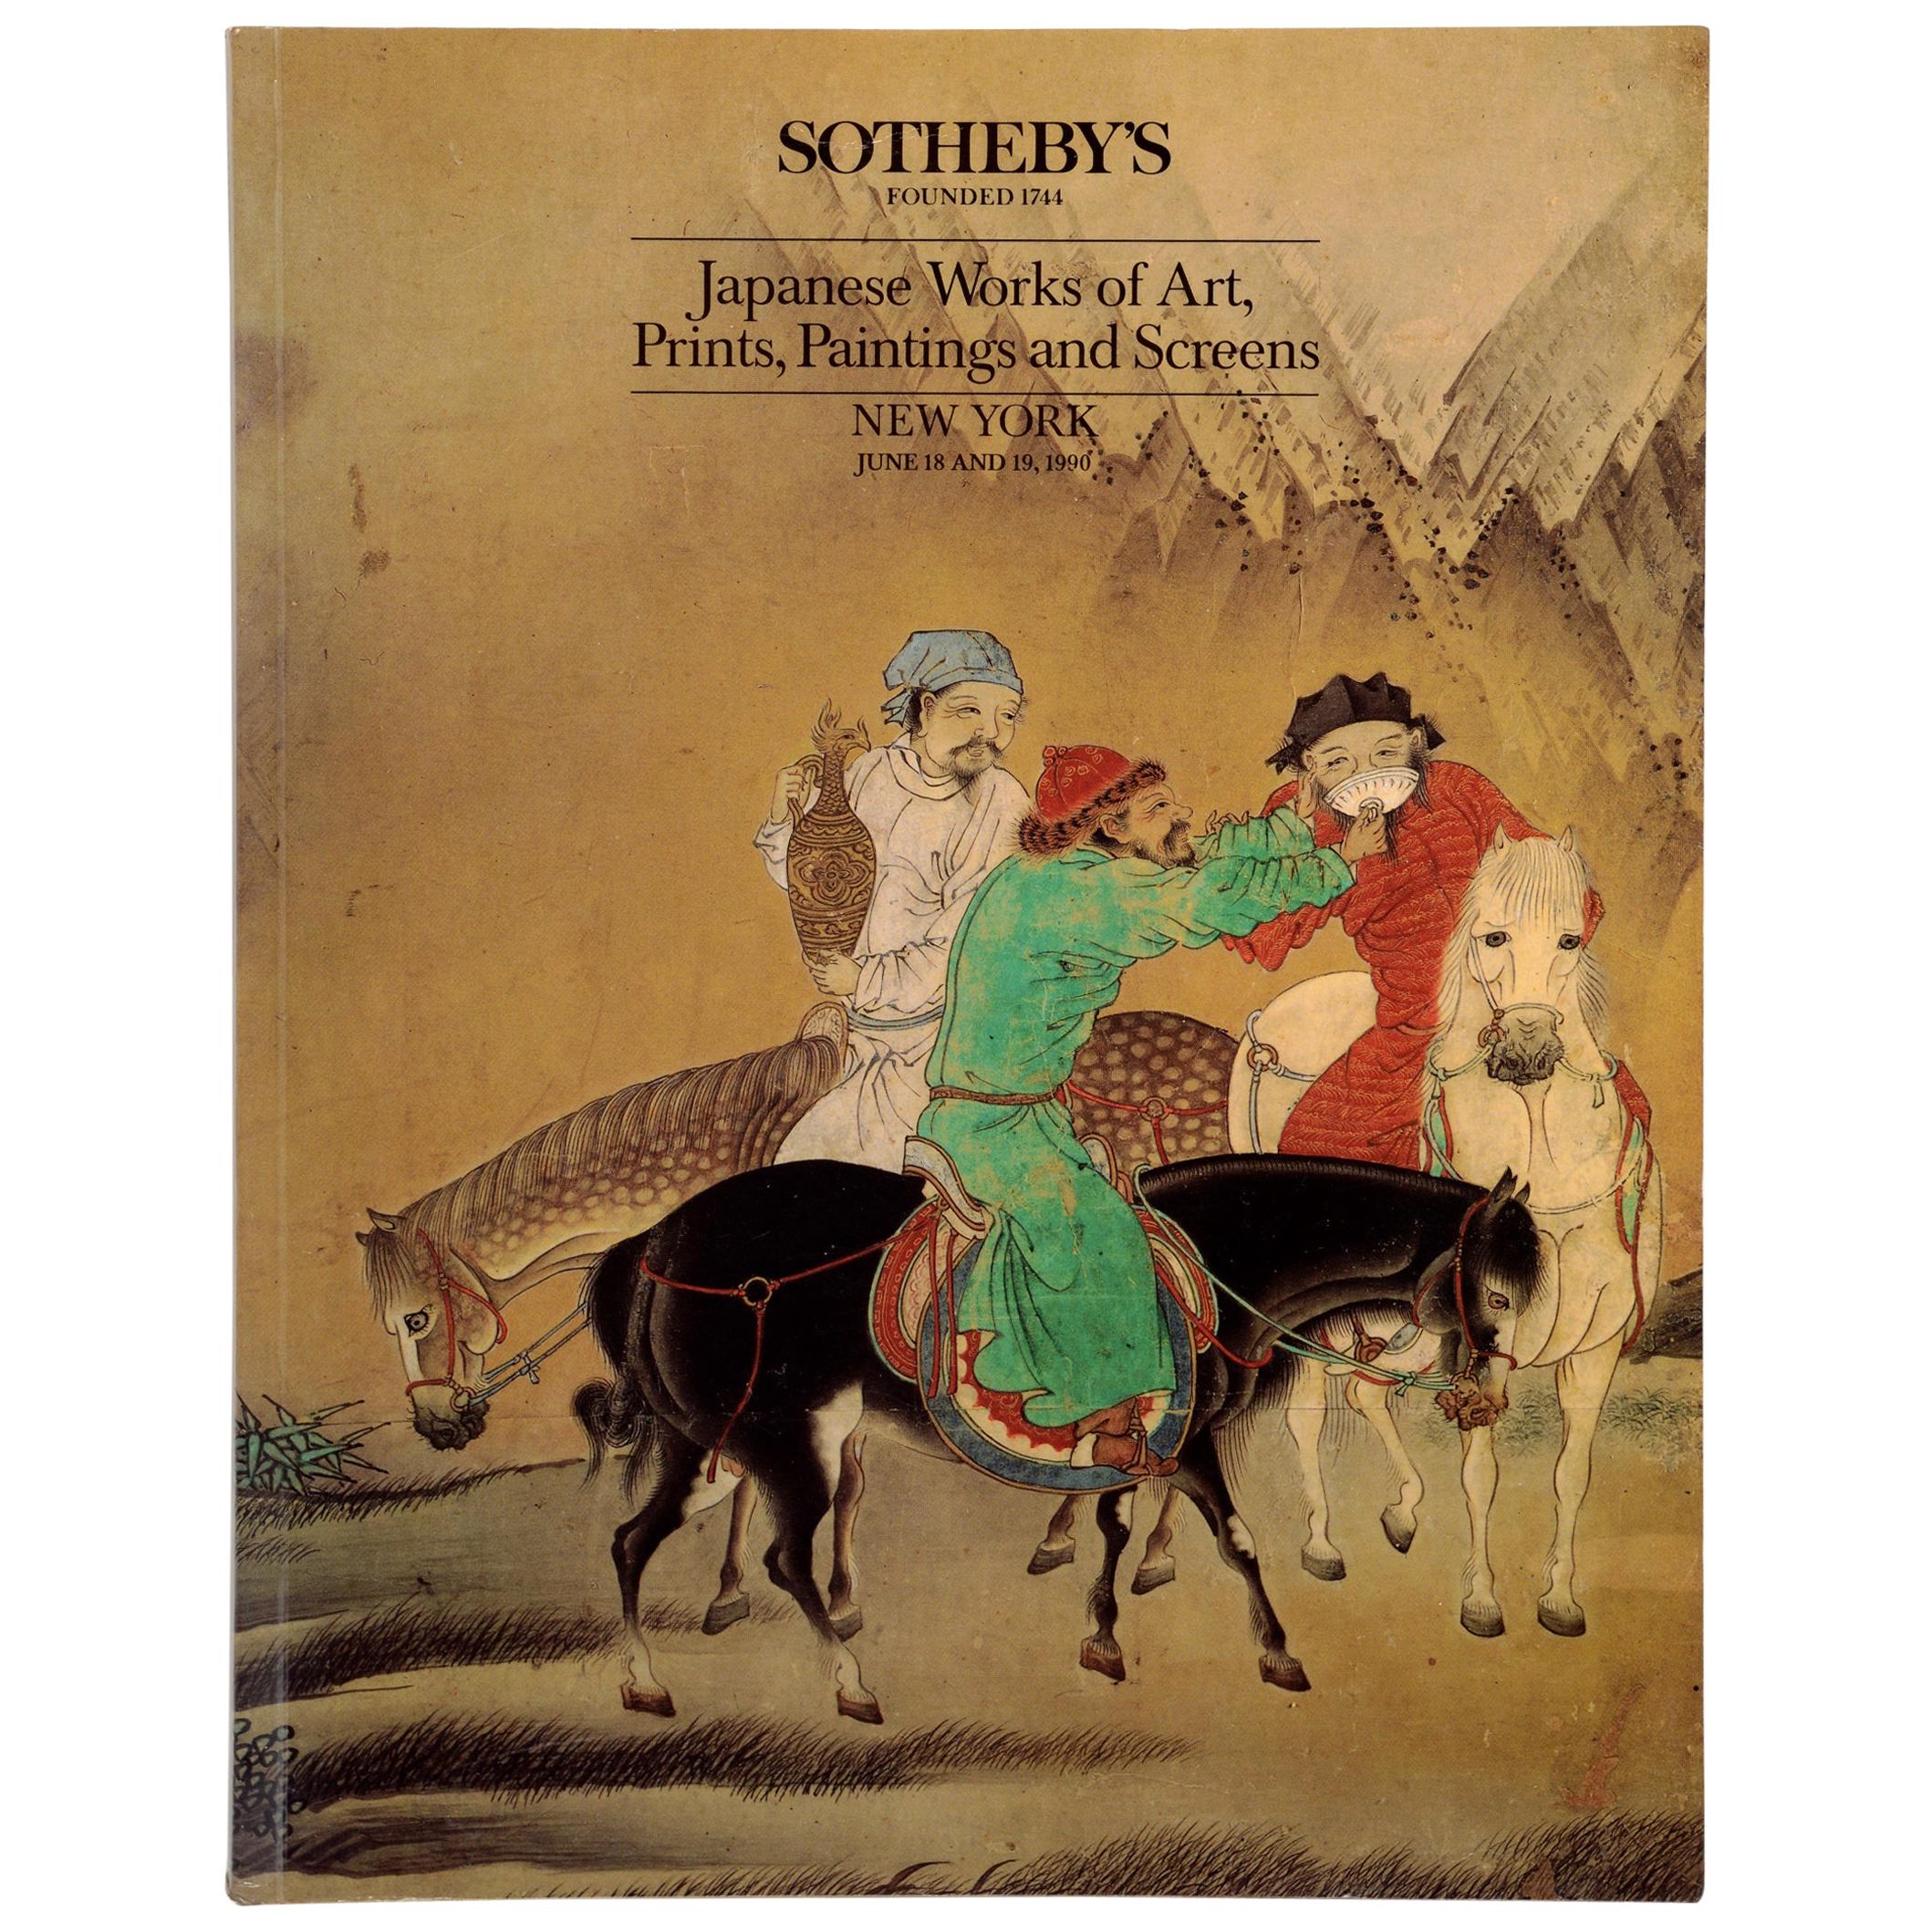 Sotheby's Japanese Prints, Paintings and Screens, New York June 18, 1990 For Sale